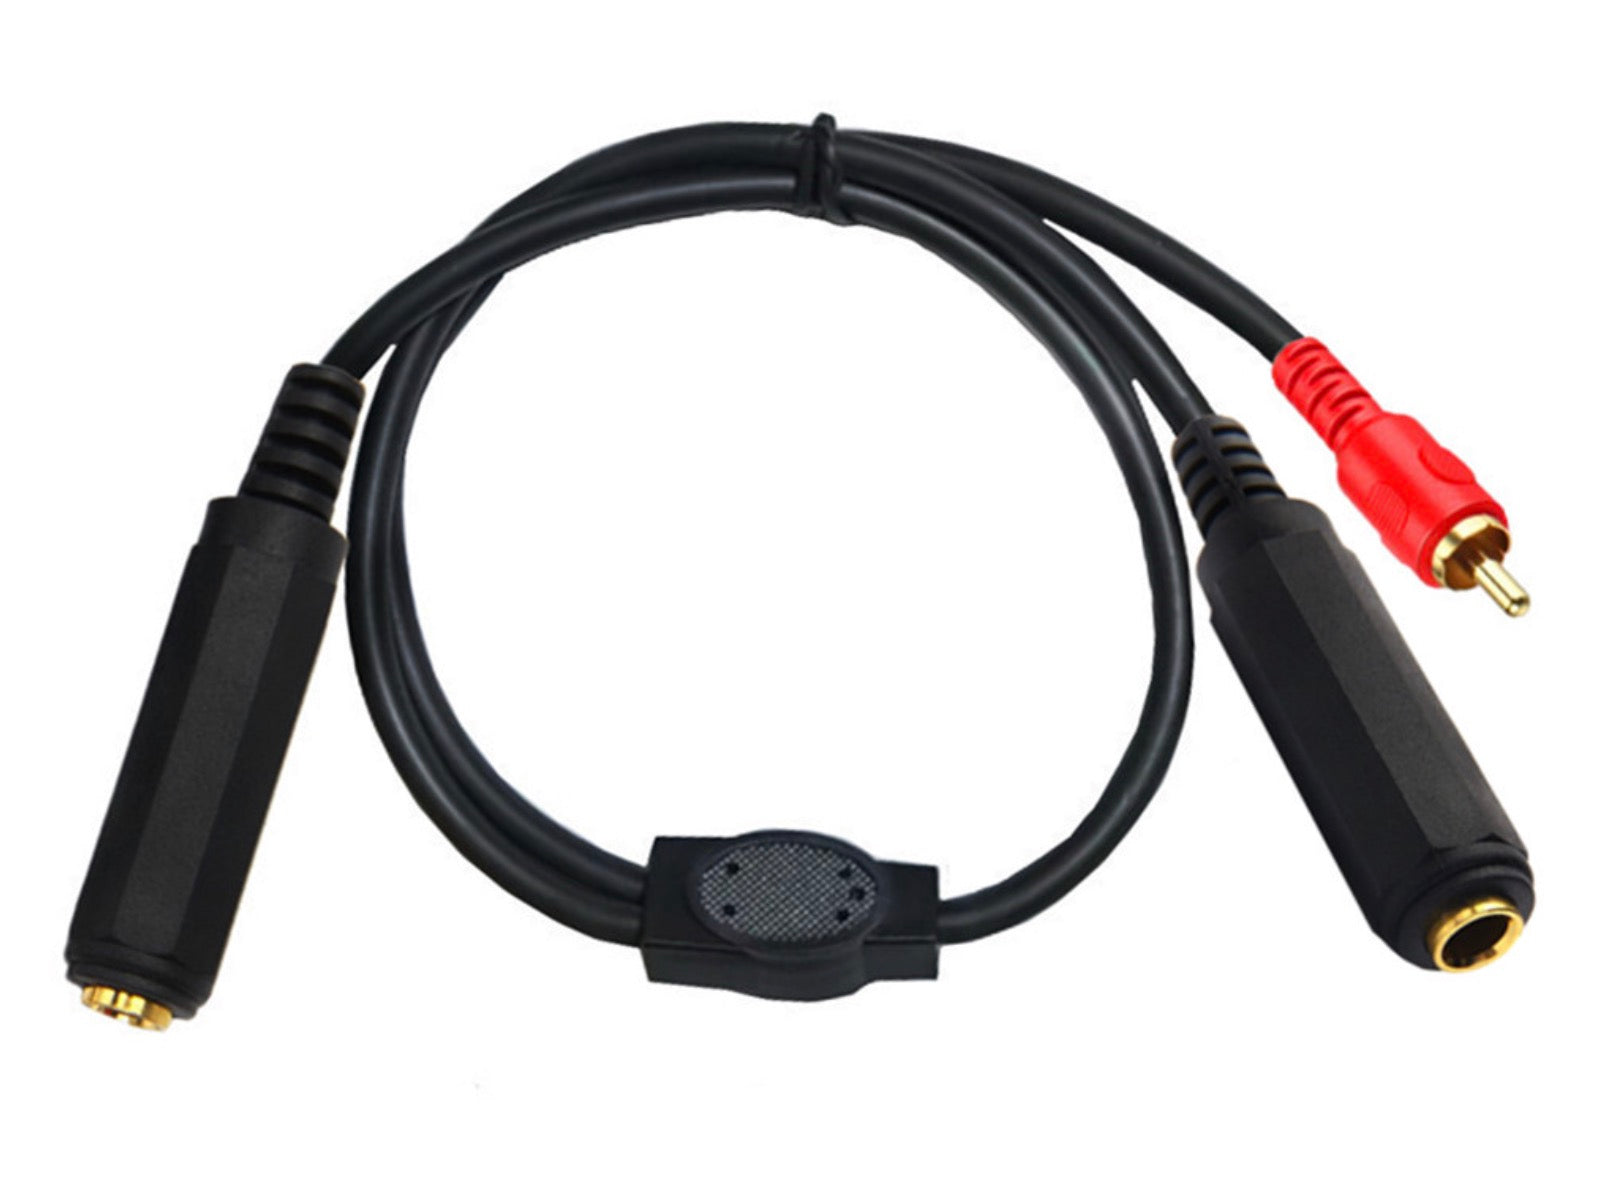 6.35mm Female to 6.35mm Female + RCA Male Stereo Headphone Guitar Extension Cable 0.5m